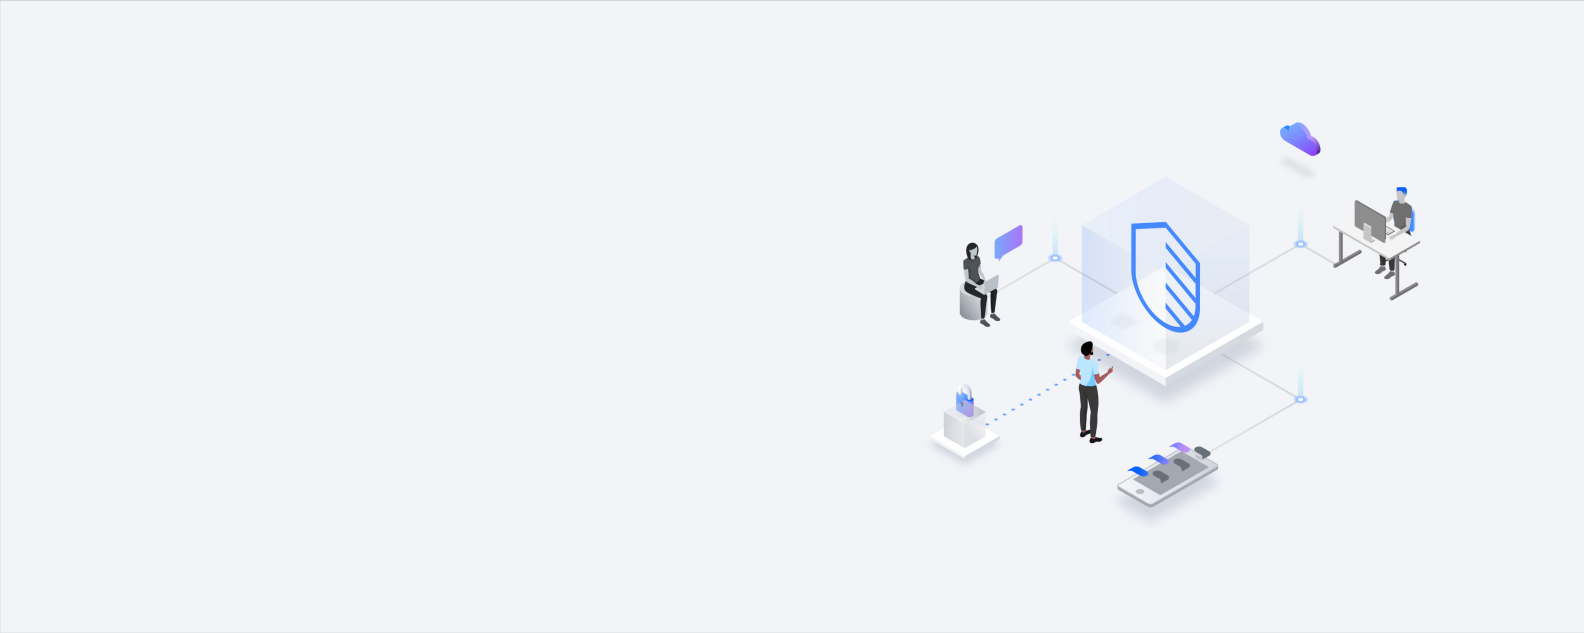 Isometric drawing showing different office personnel, all using IBM Security